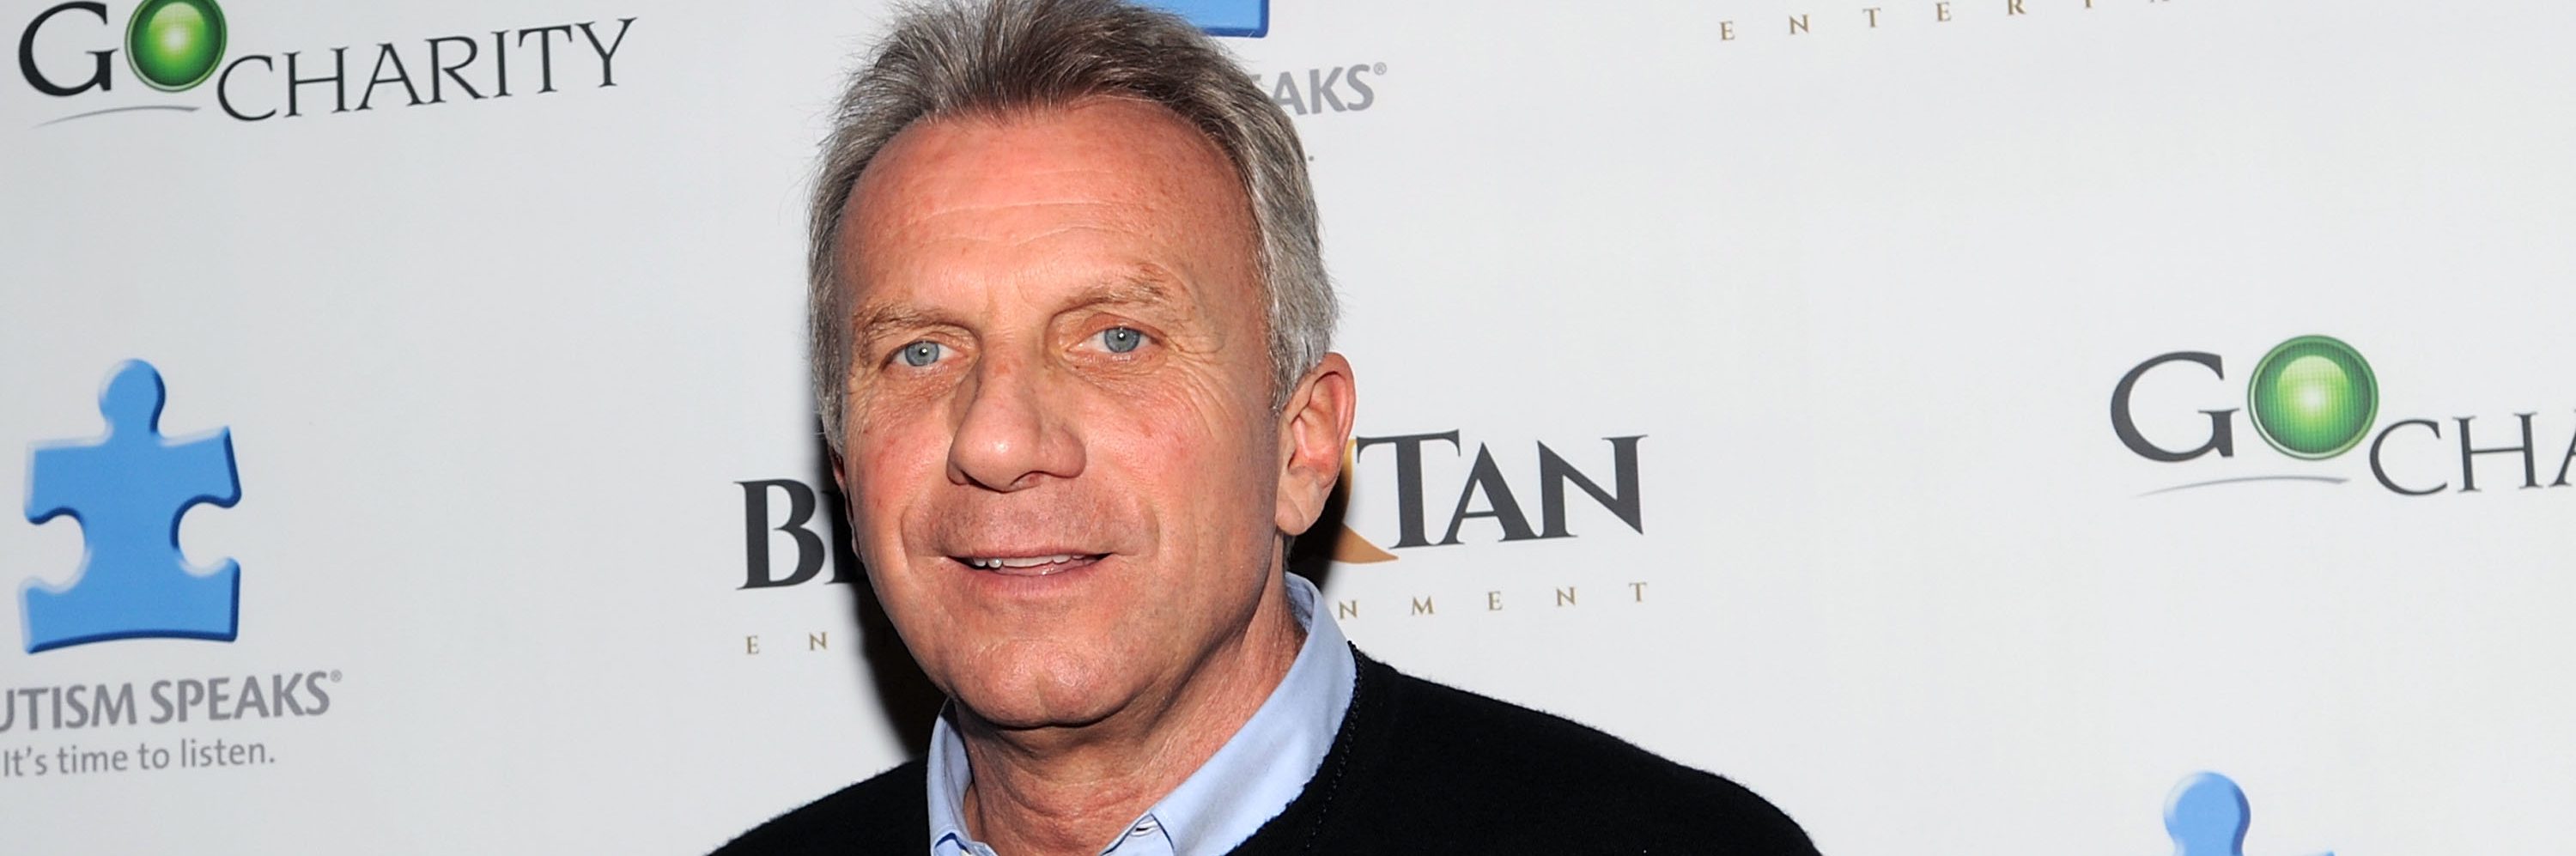 Joe Montana: It’s “Almost Impossible” to Compare Quarterbacks From Different Eras